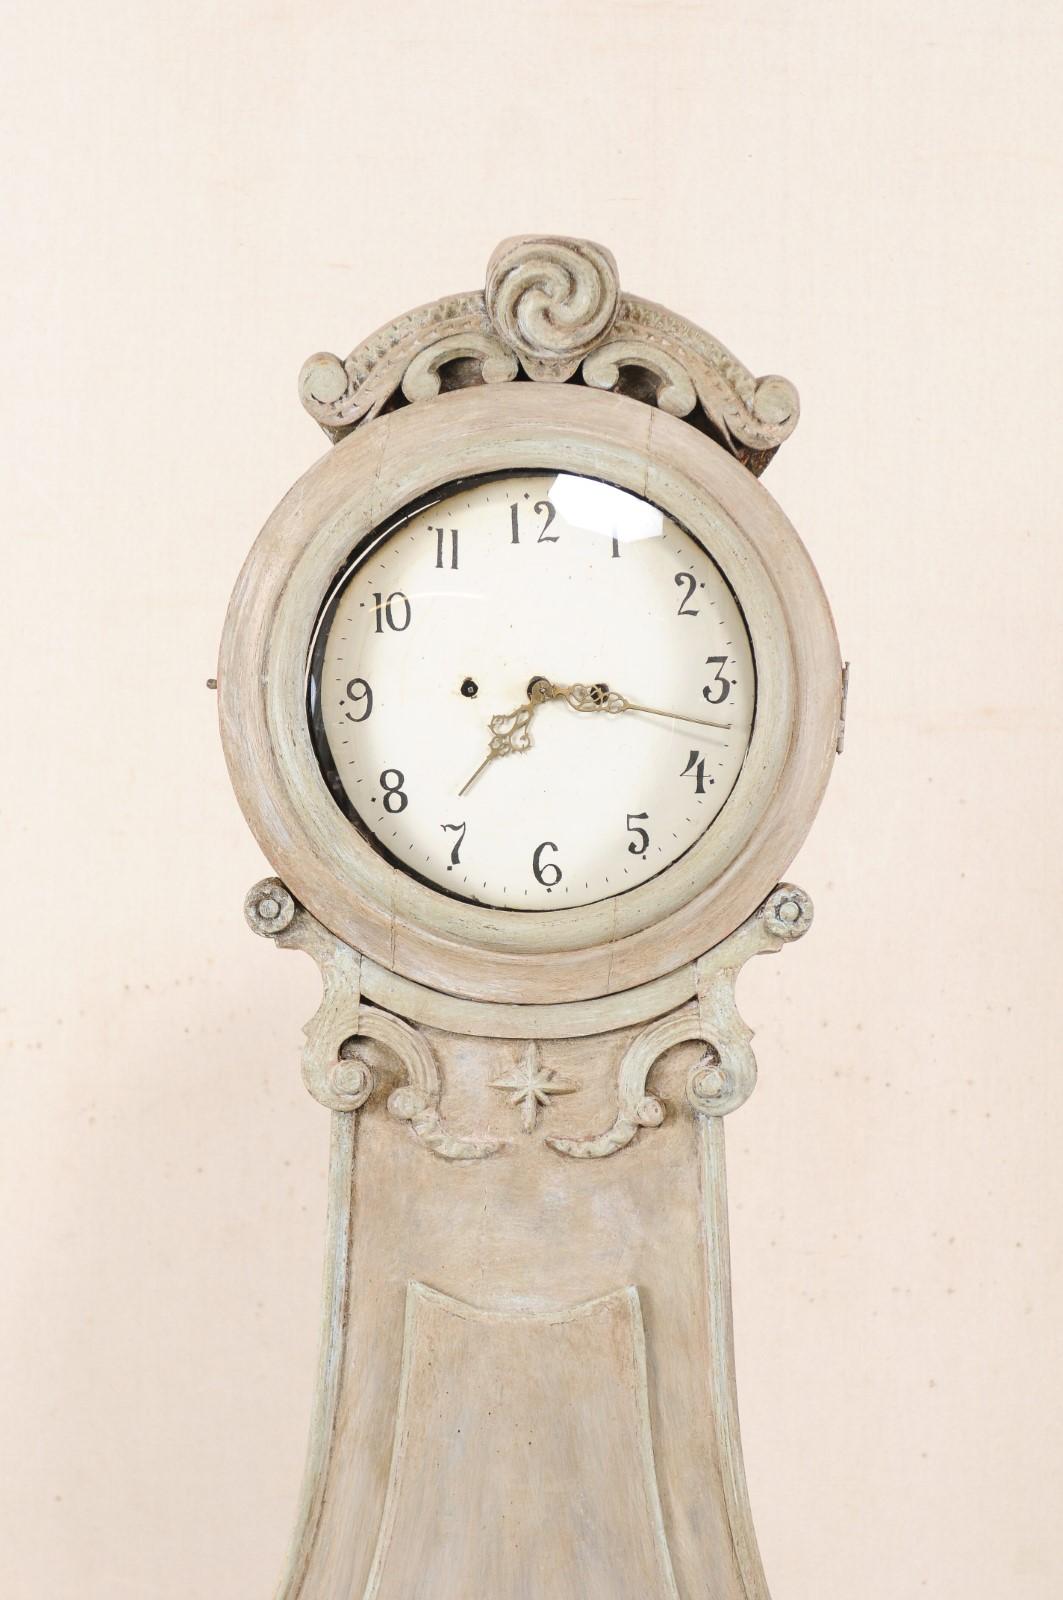 Hand-Carved 19th Century Swedish Fryksdahl Clock with Ornately Carved Crown and Neck